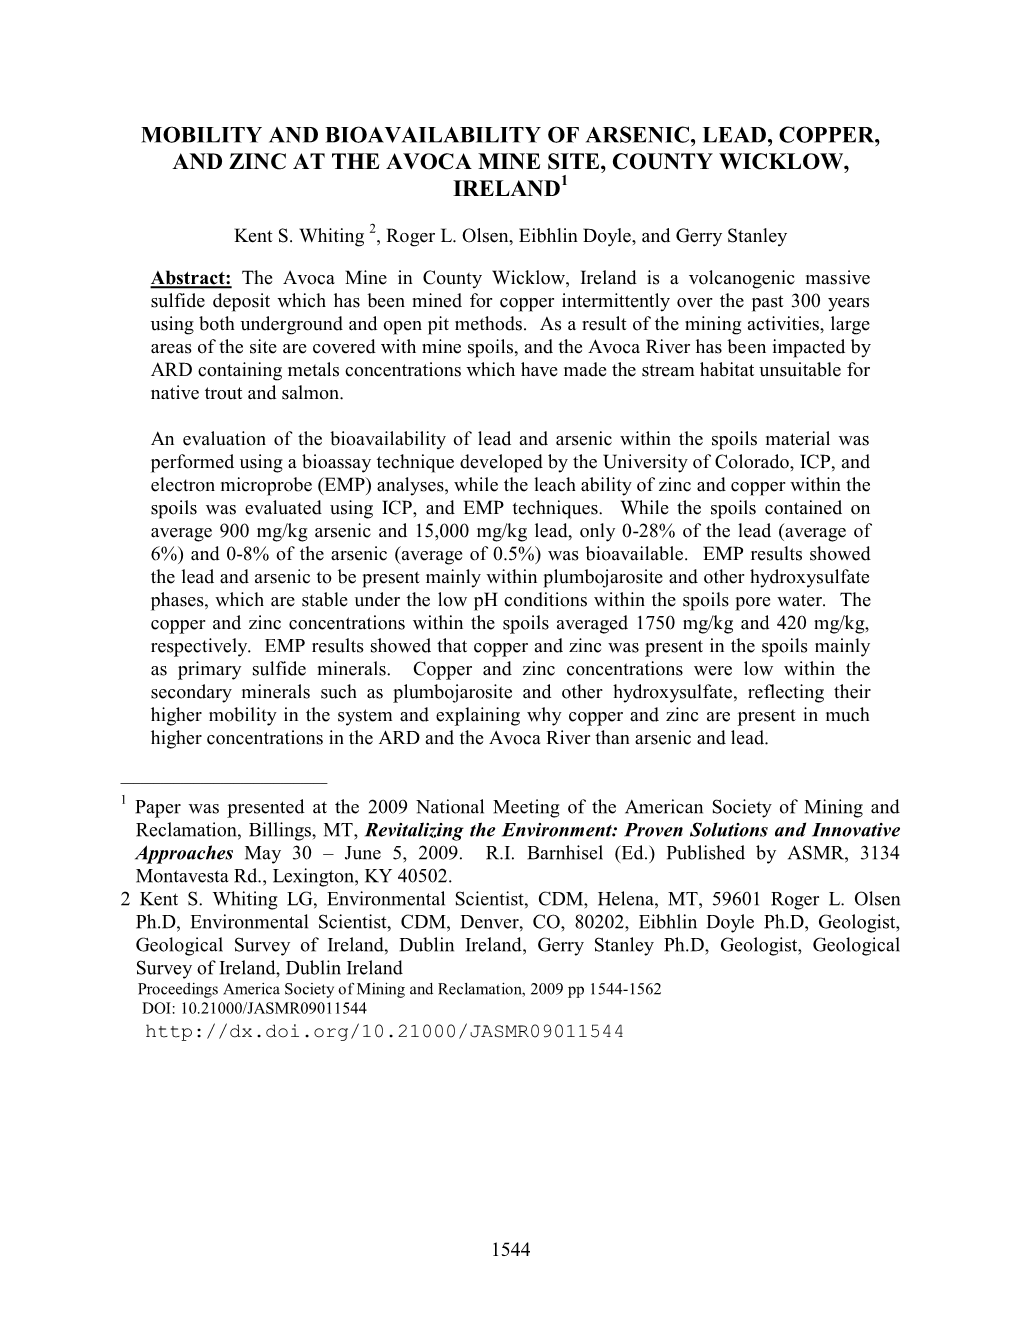 Mobility and Bioavailability of Arsenic, Lead, Copper, and Zinc at the Avoca Mine Site, County Wicklow, Ireland1